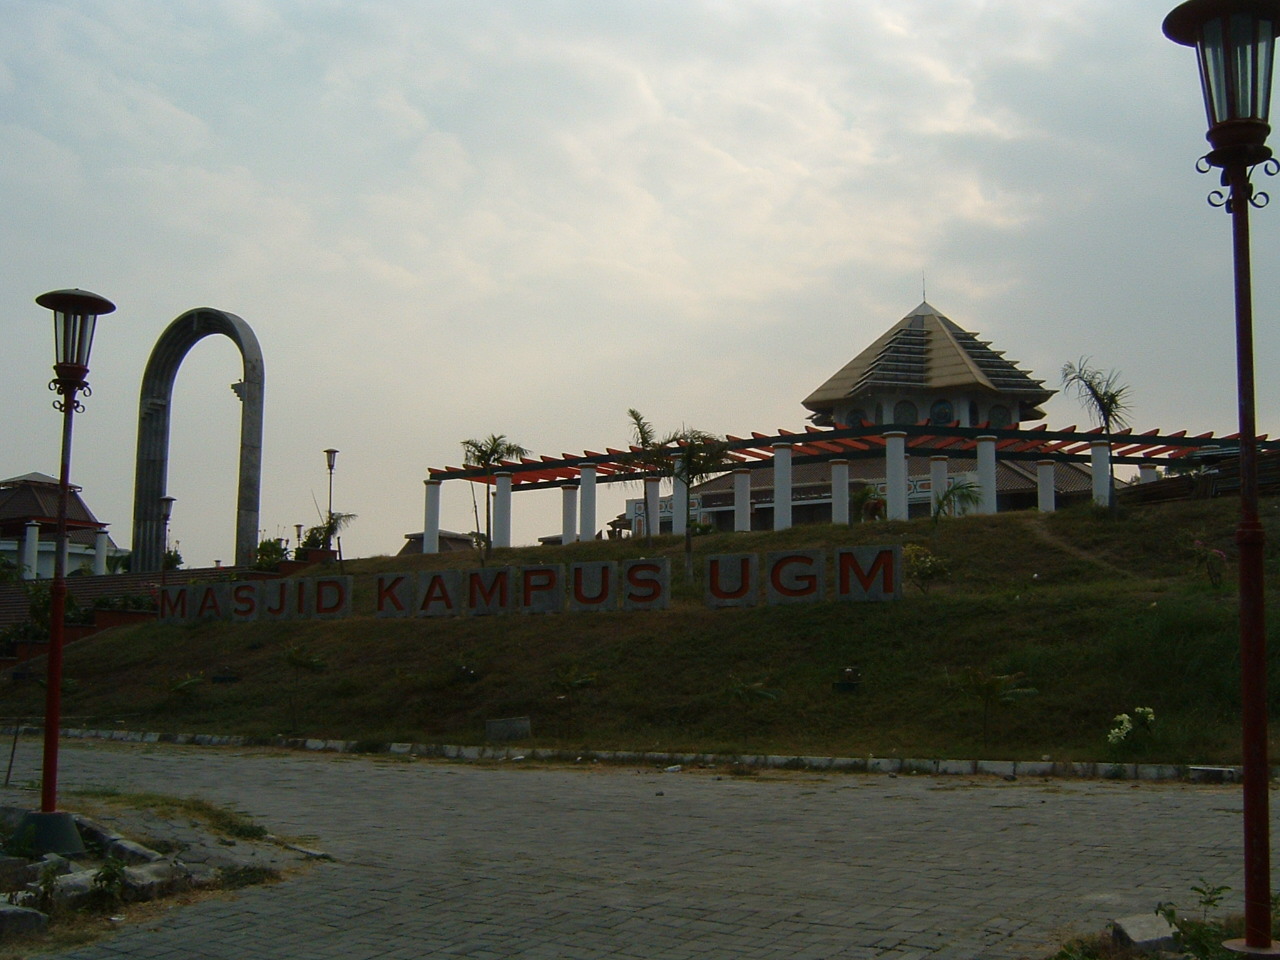 General view looking southwest at the Masjid Campus UGM (Gadjah Mada University Campus Mosque) and the main arched entryway